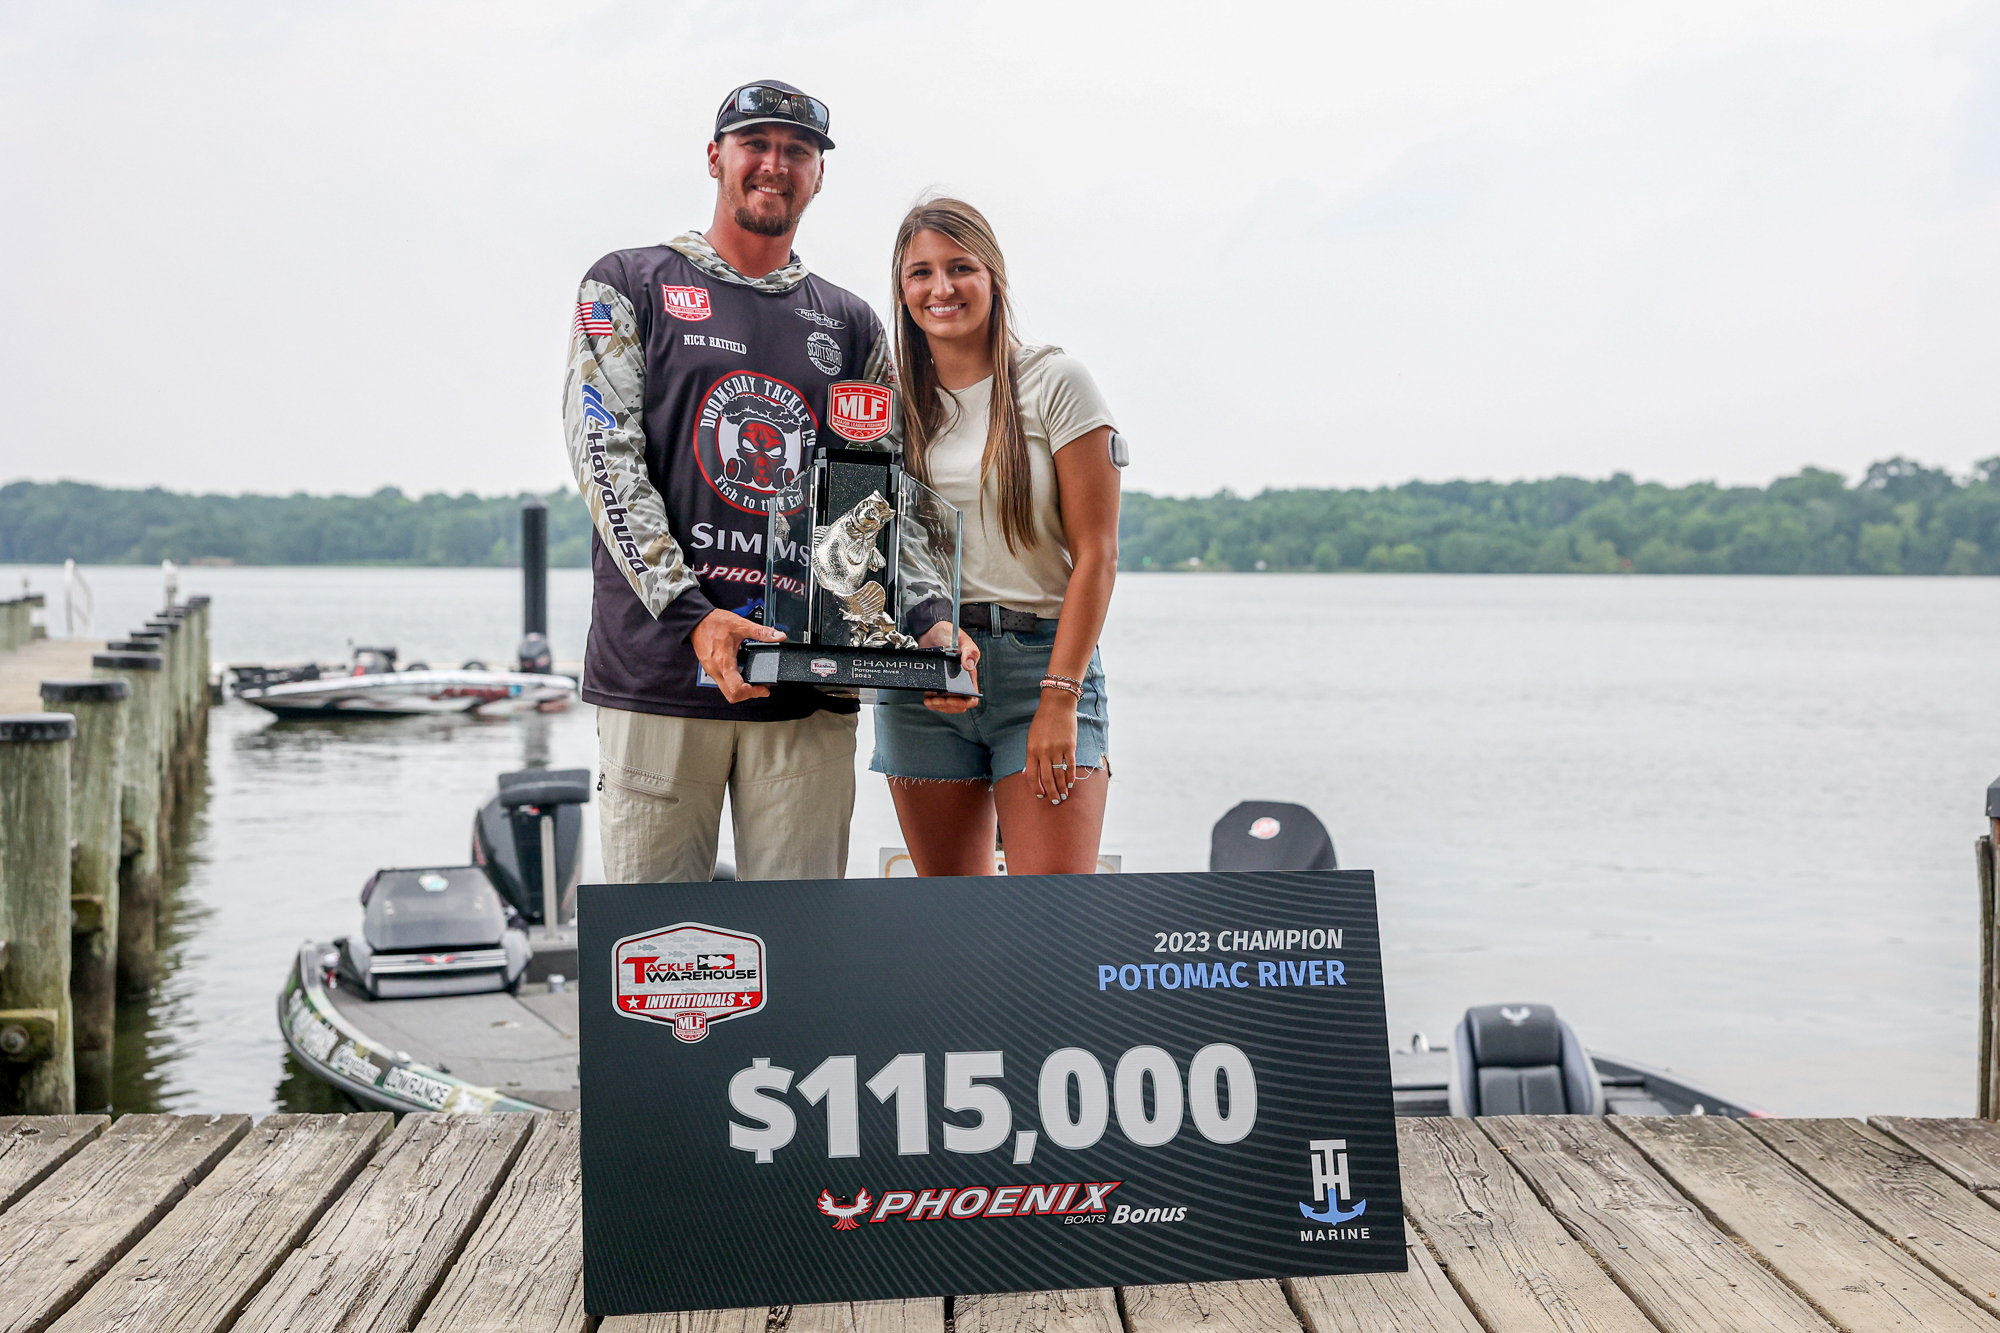 JACOB WHEELER: 2024 will be 'the great reset' - Major League Fishing